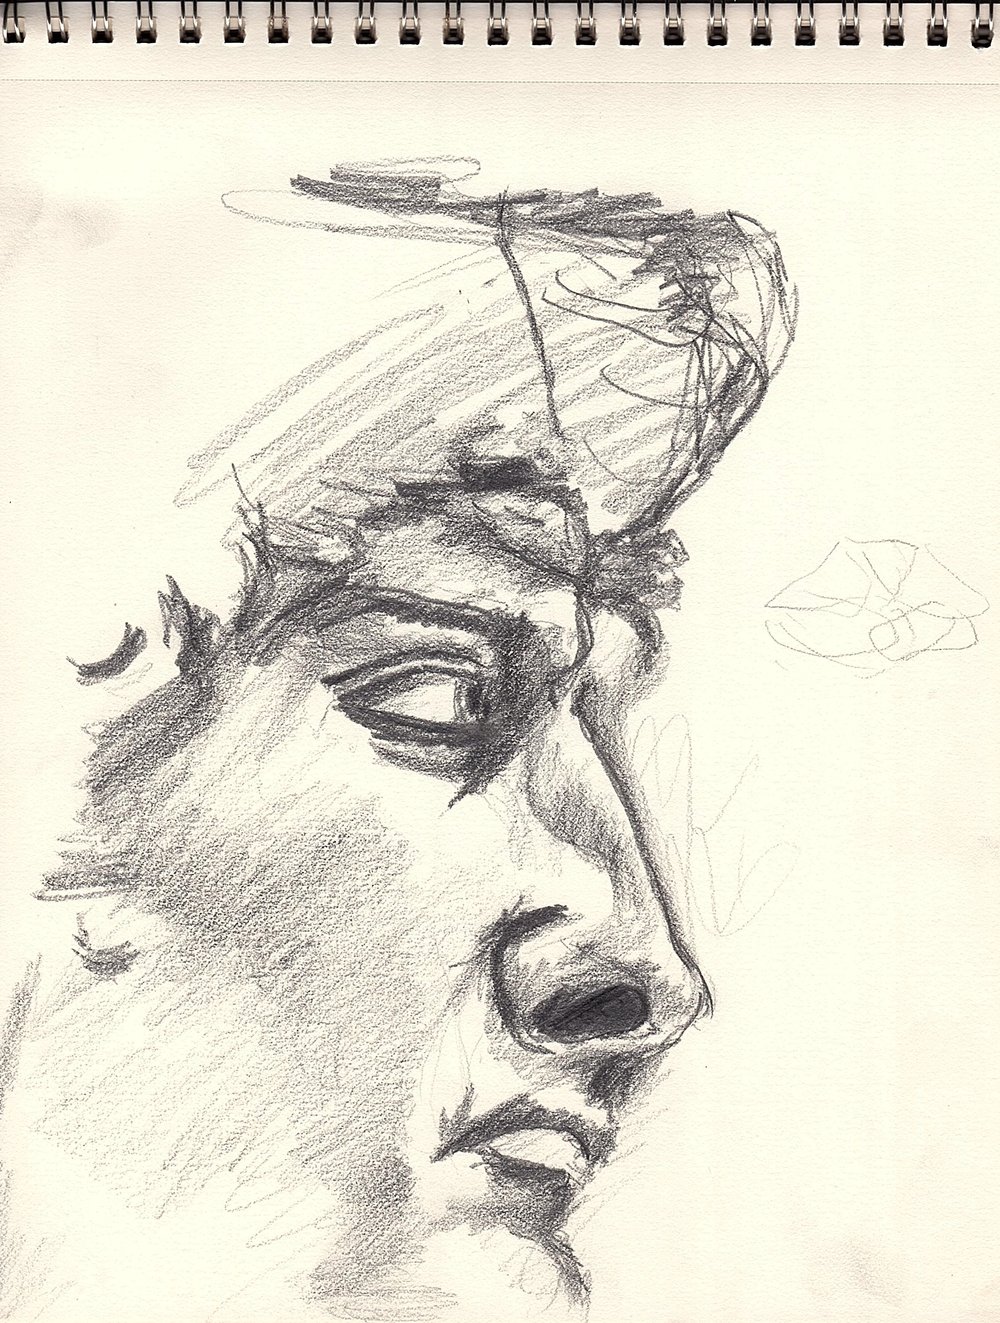 A summer of architectural sketching in Italy-face-sketch-David.jpg